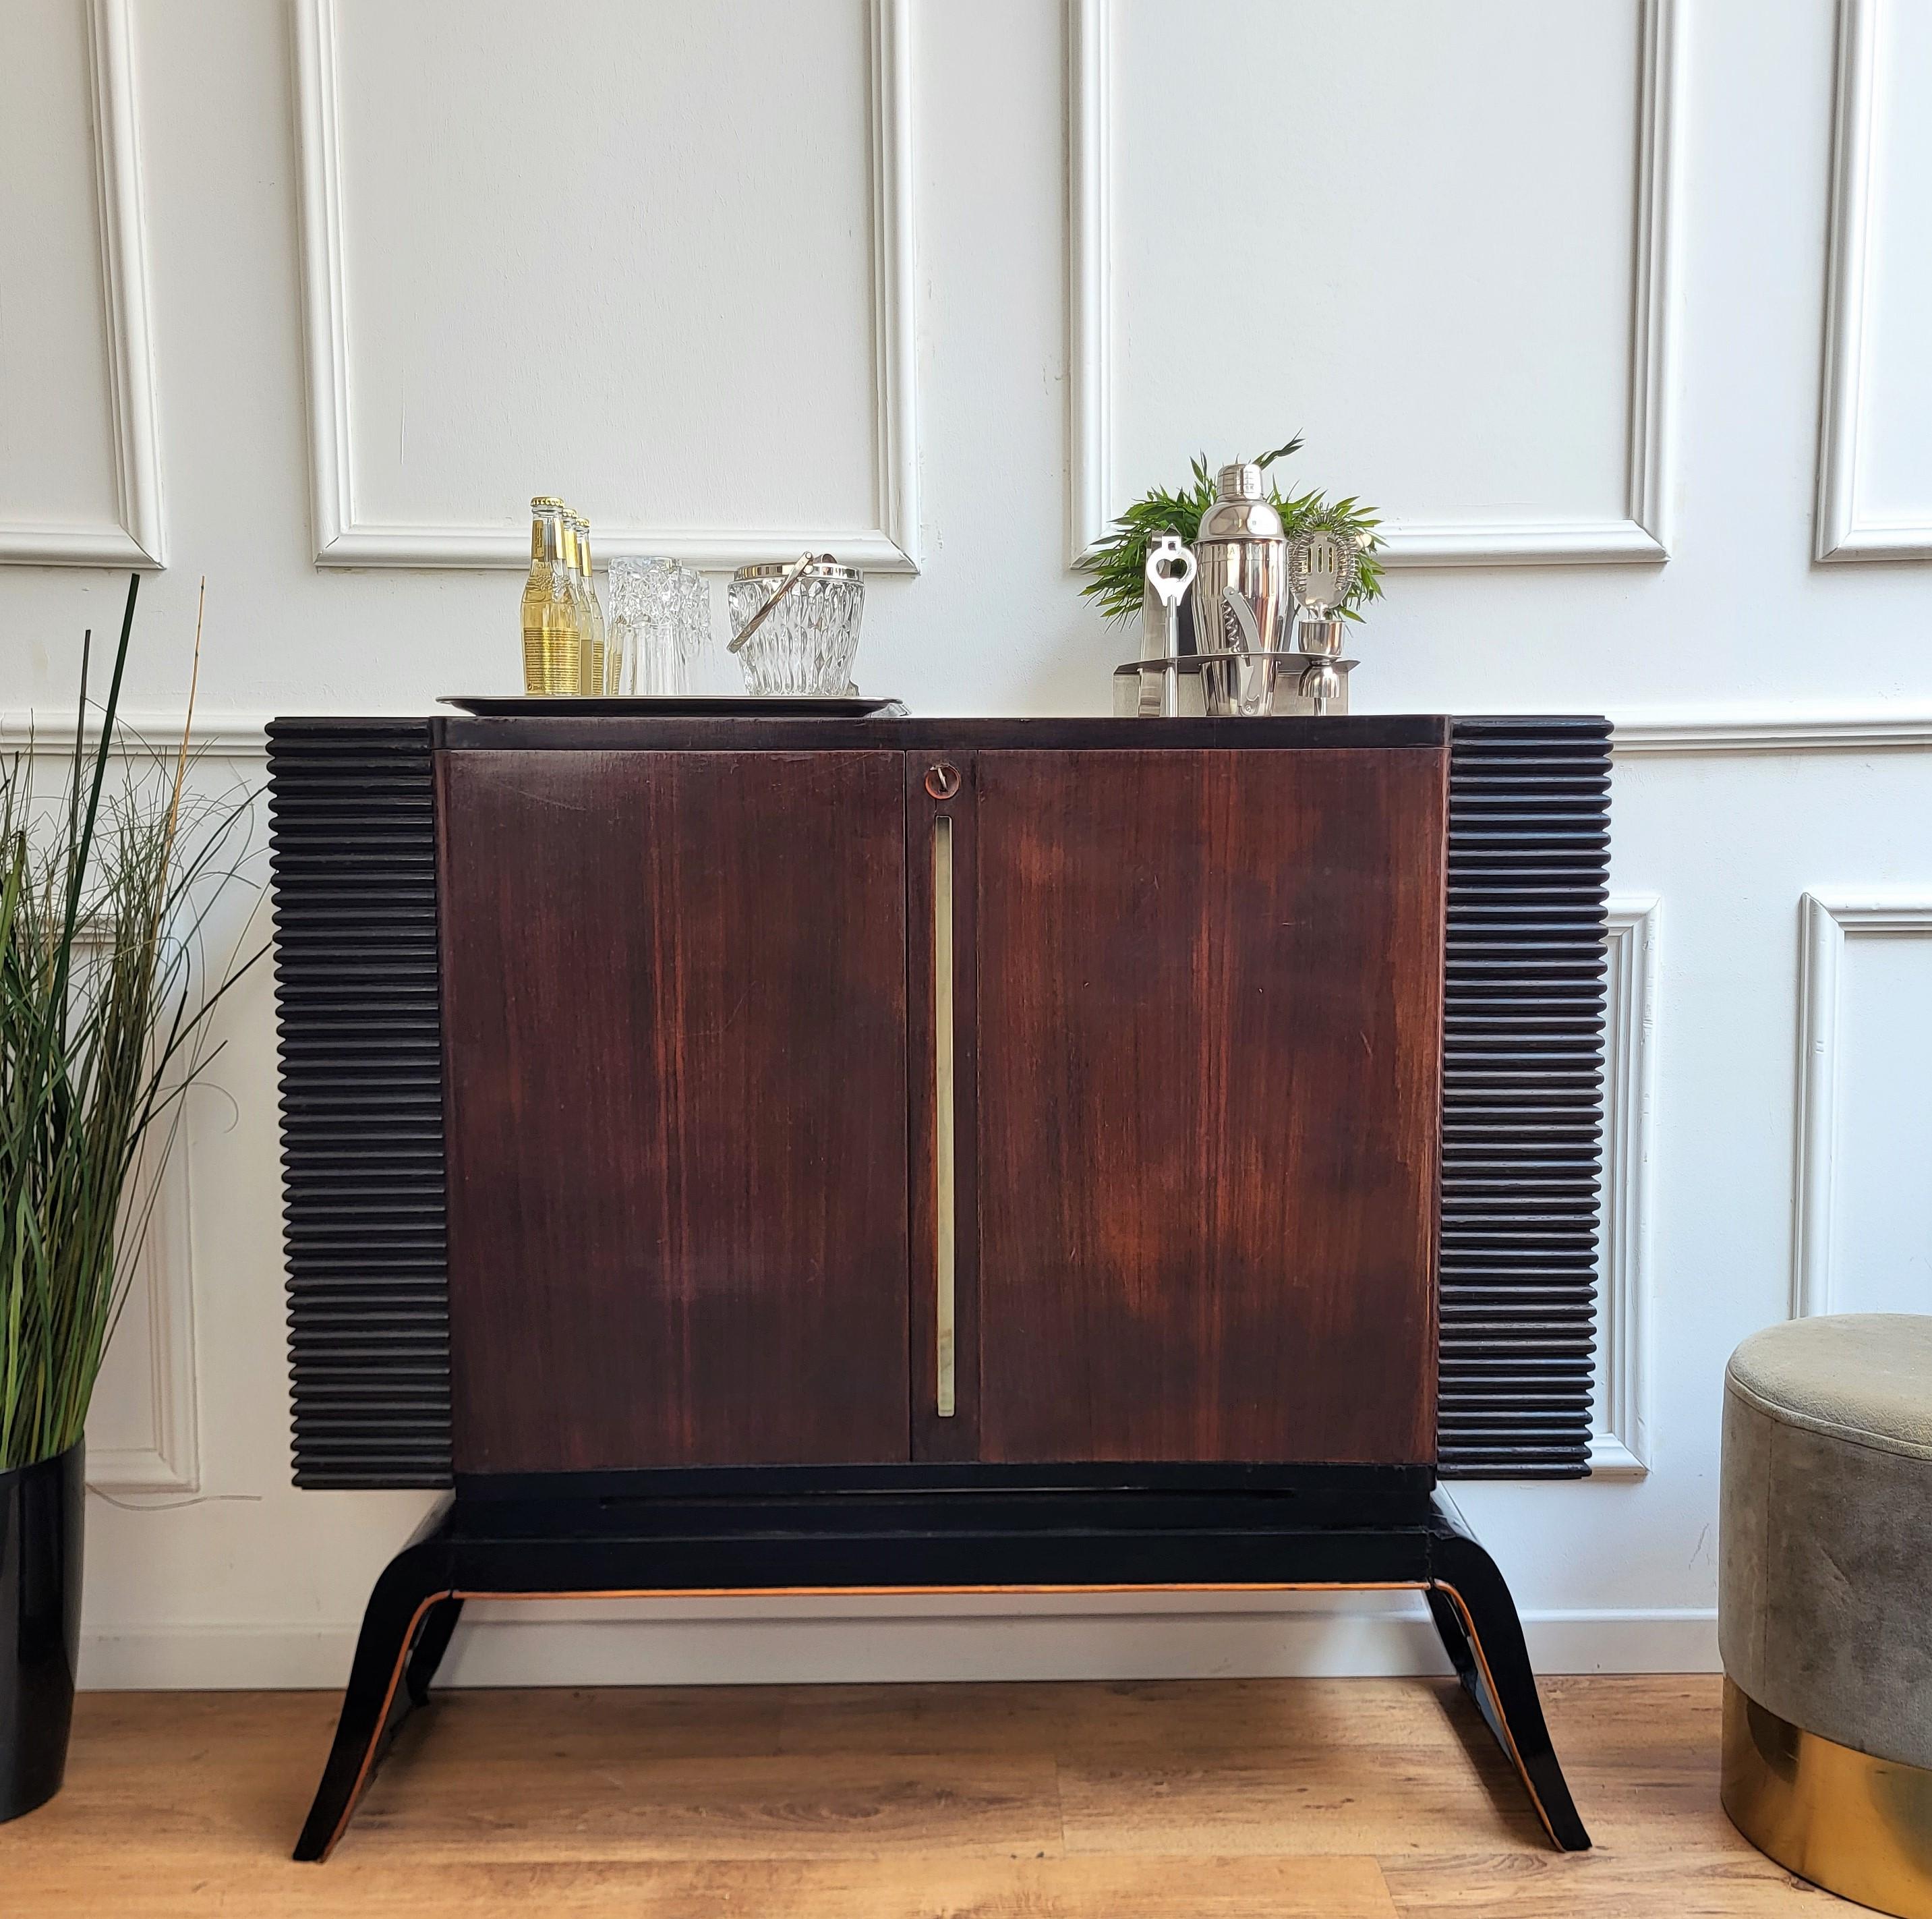 Very elegant Italian Art Deco Mid-Century Modern drinks dry bar cabinet with beautifully carved slatted walnut wood with two central doors. When opened, on the inside, as well as on the doors, we have glass and wooden shelves for bottles and